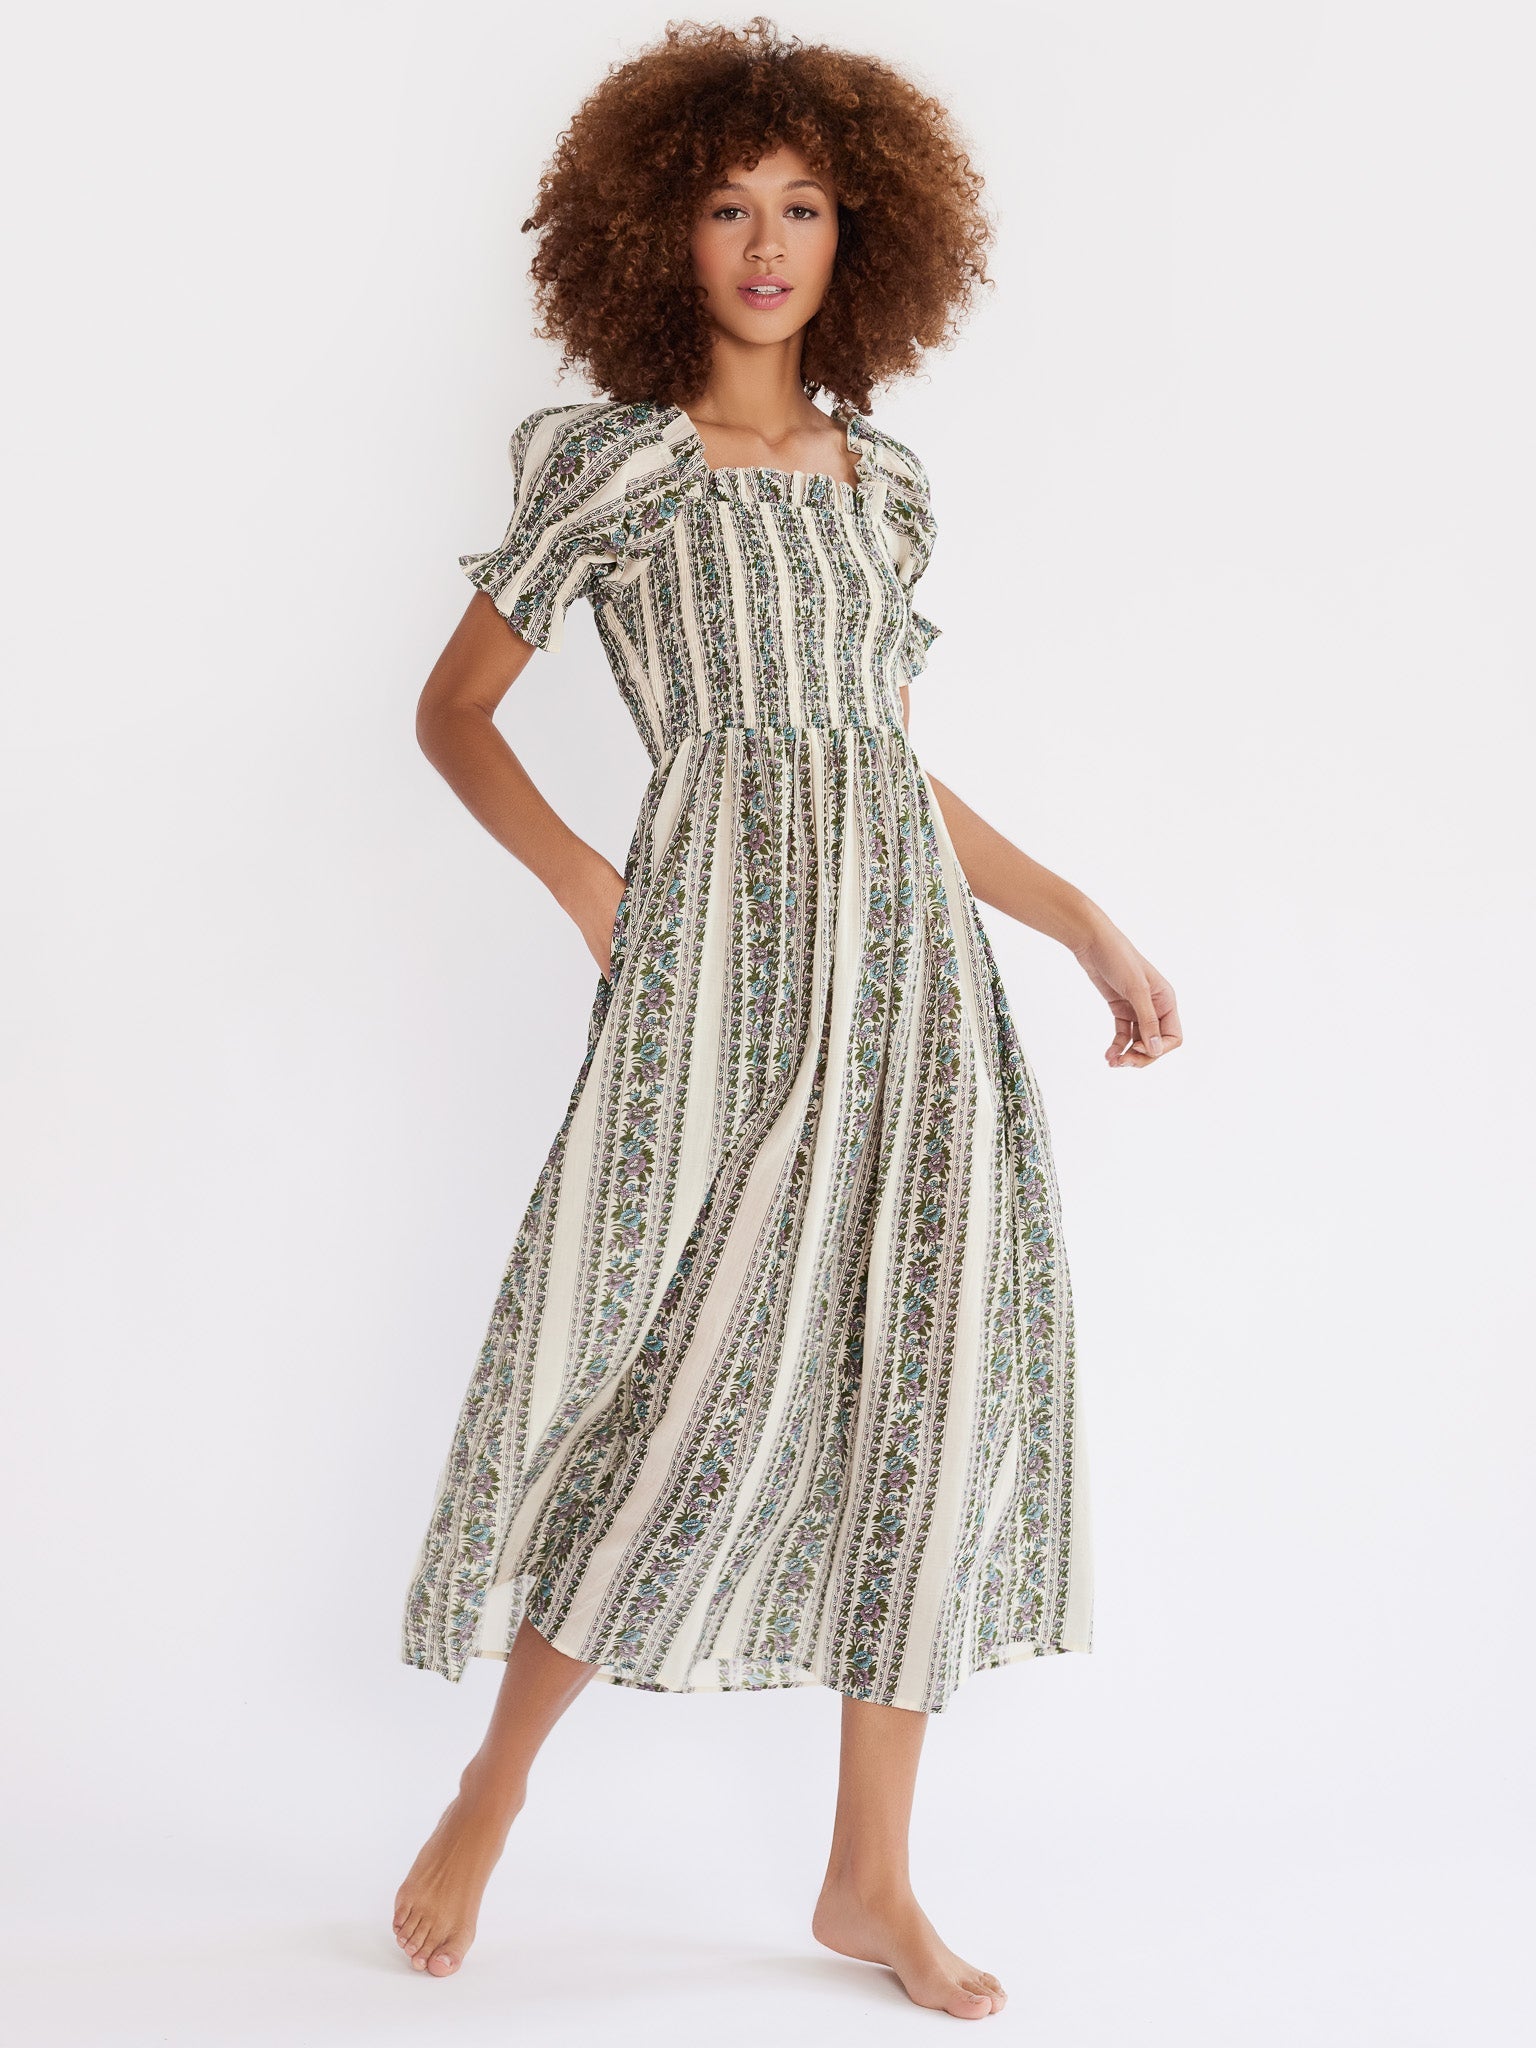 MILLE Clothing Cate Dress in Goa Stripe